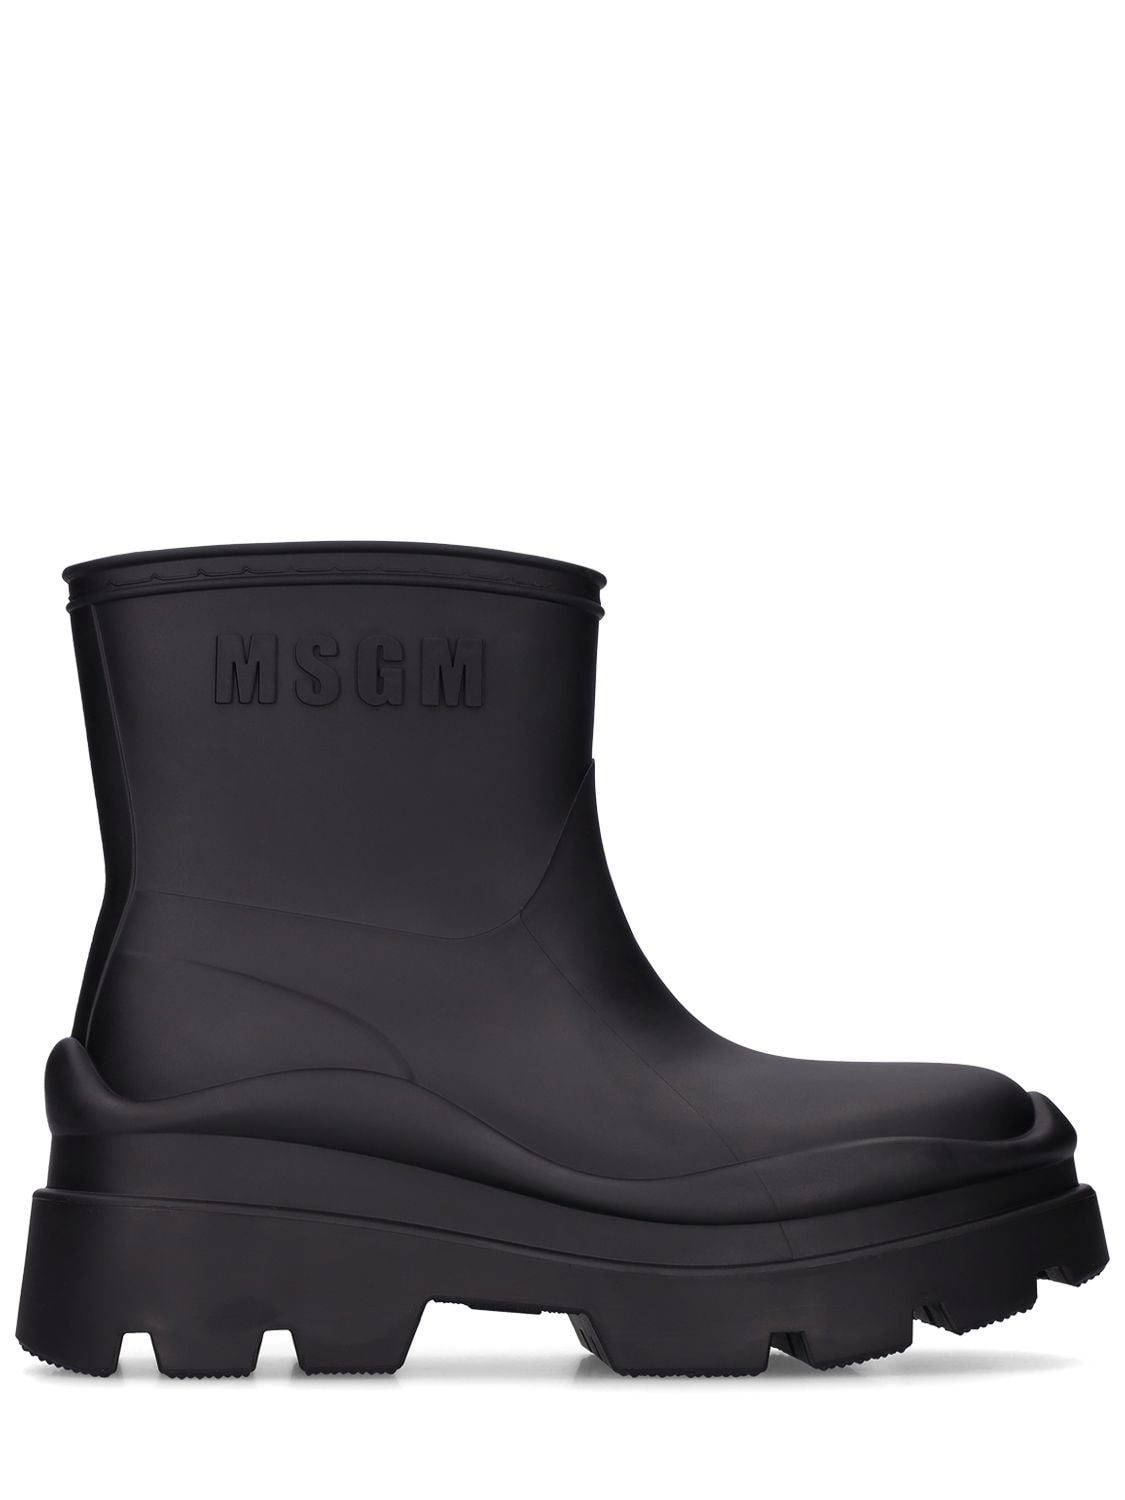 MSGM LOGO OUTDOOR BOOTS